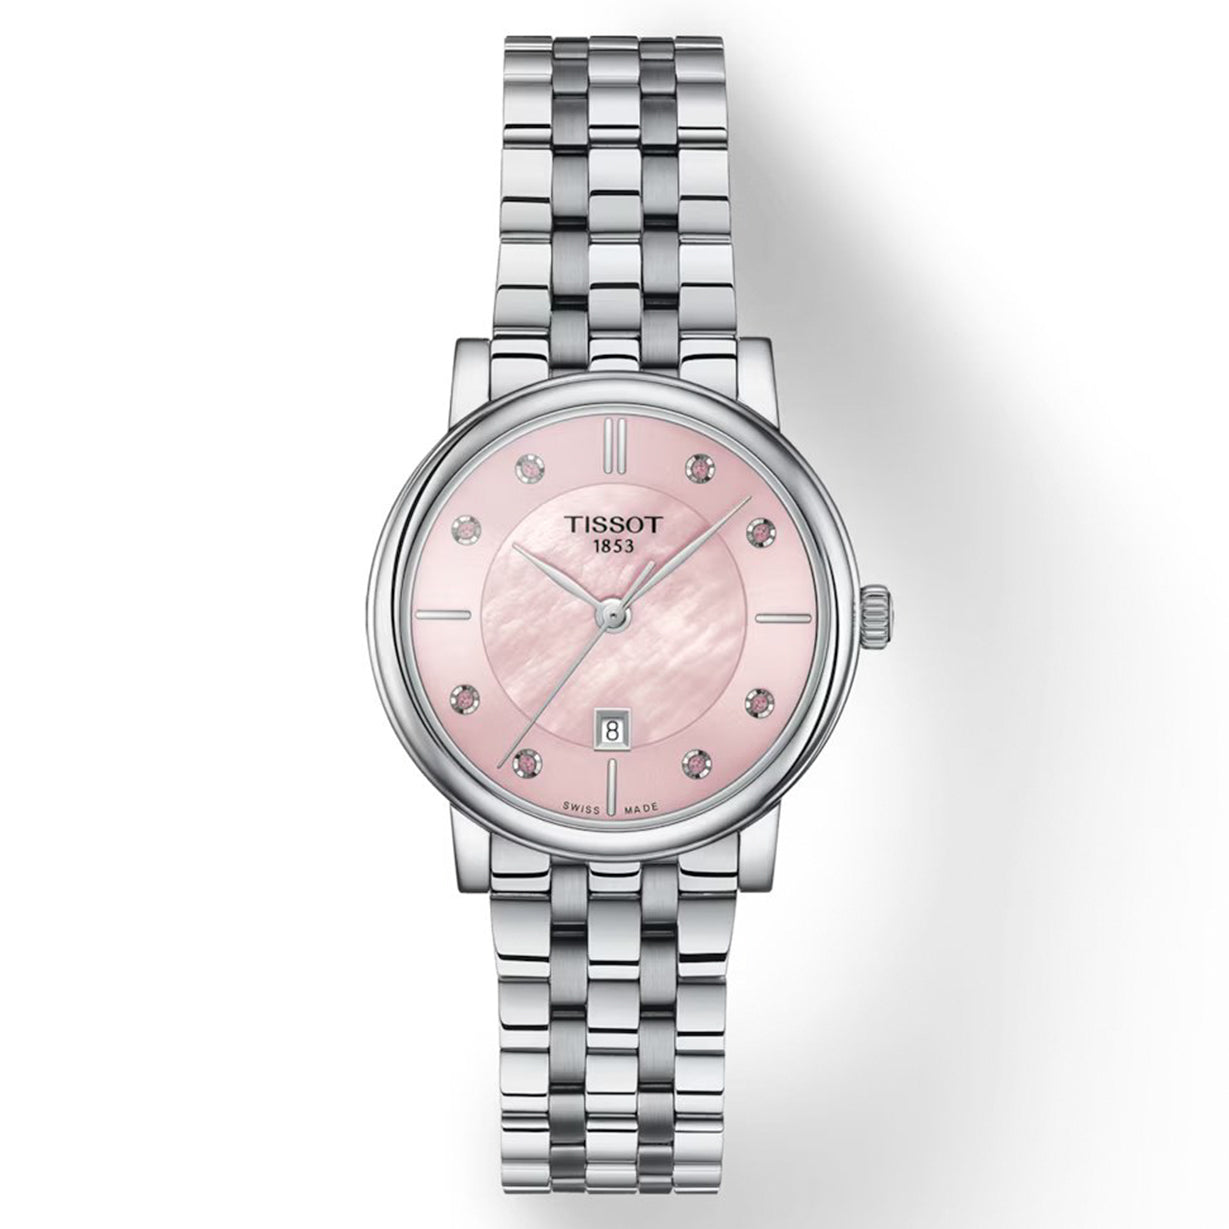 Tissot T-Classic Pink Mother-Of-Pearl Dial Women 30mm